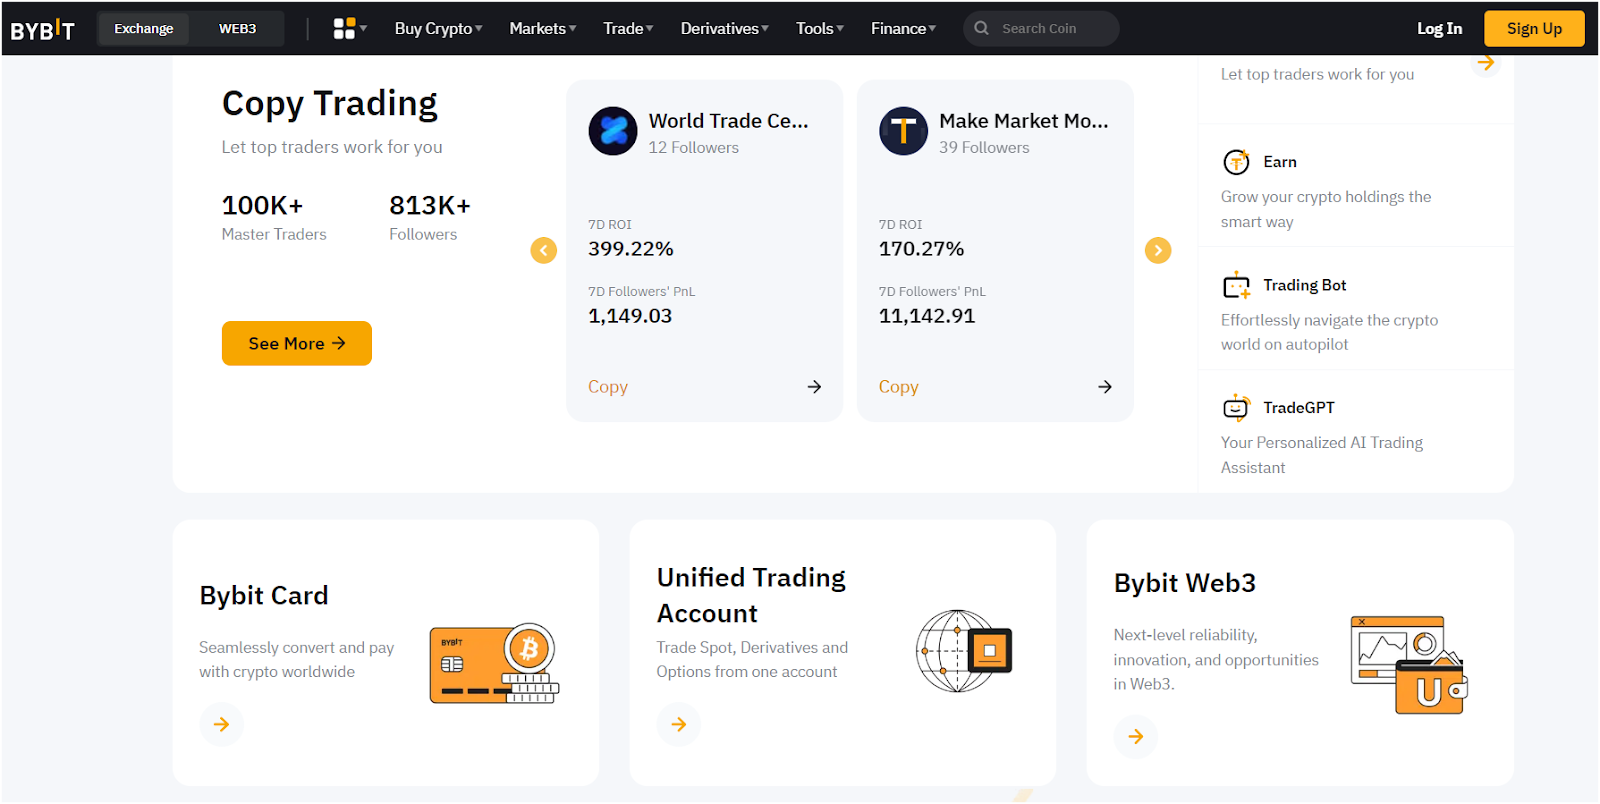 About Bybit Exchange